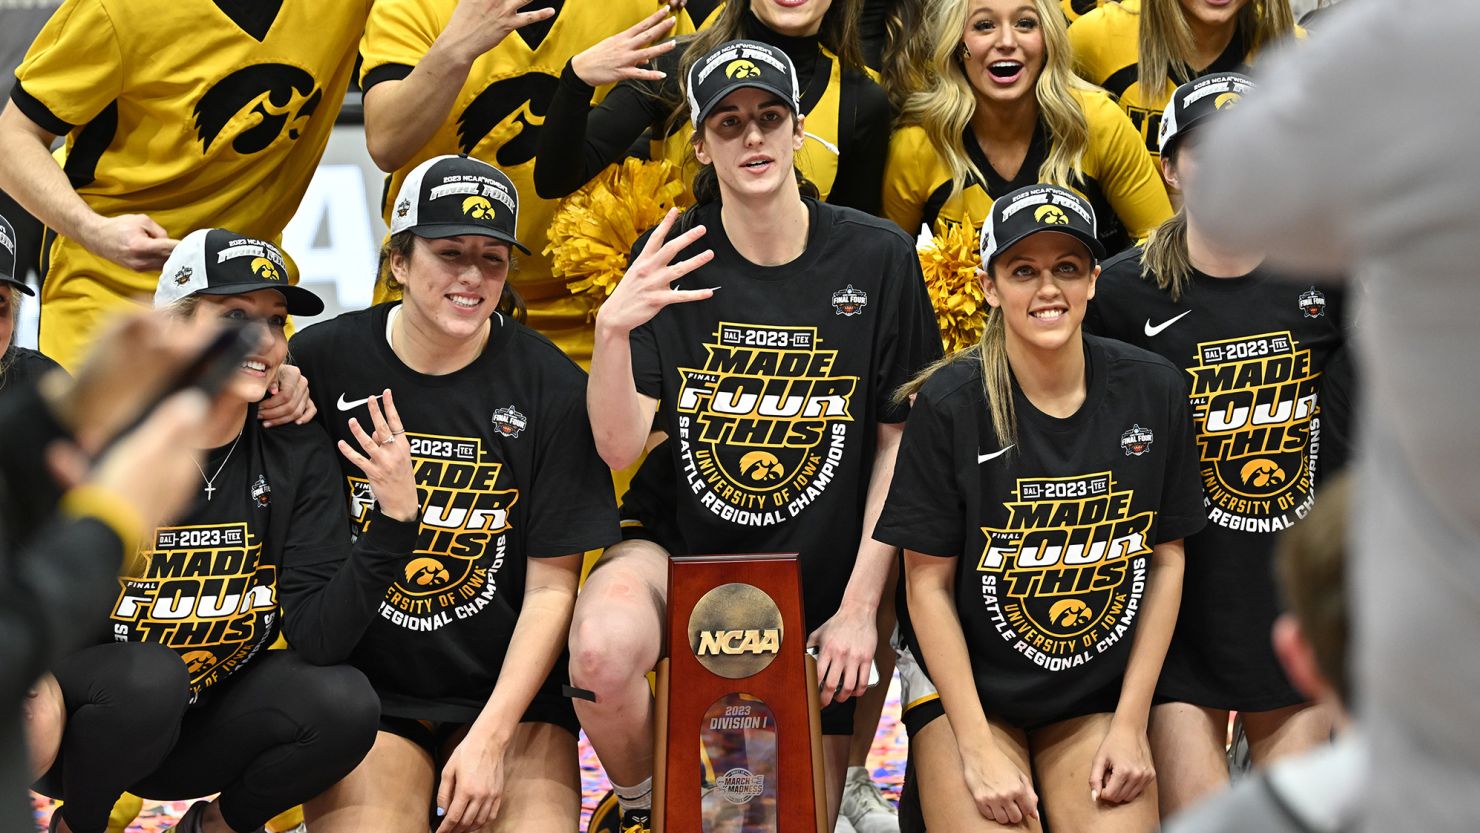 March Madness Caitlin Clark's historic 40point tripledouble inspires